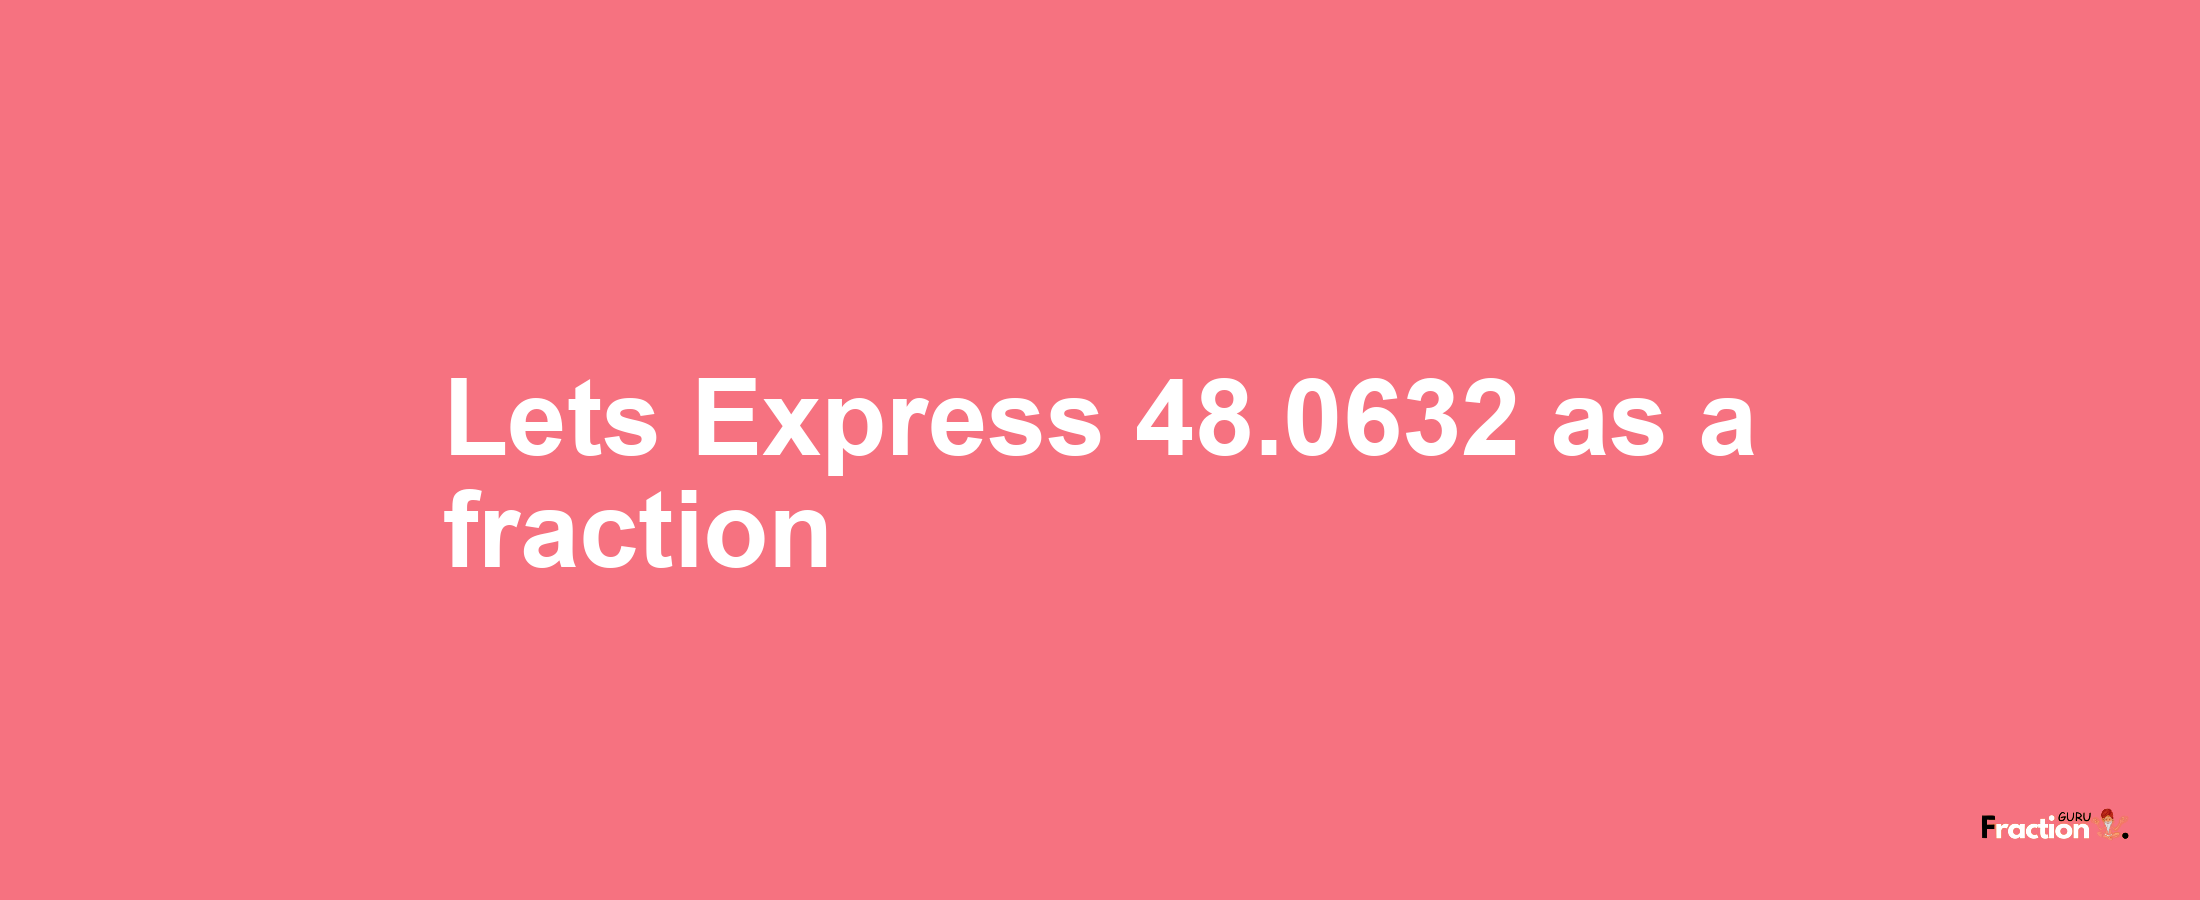 Lets Express 48.0632 as afraction